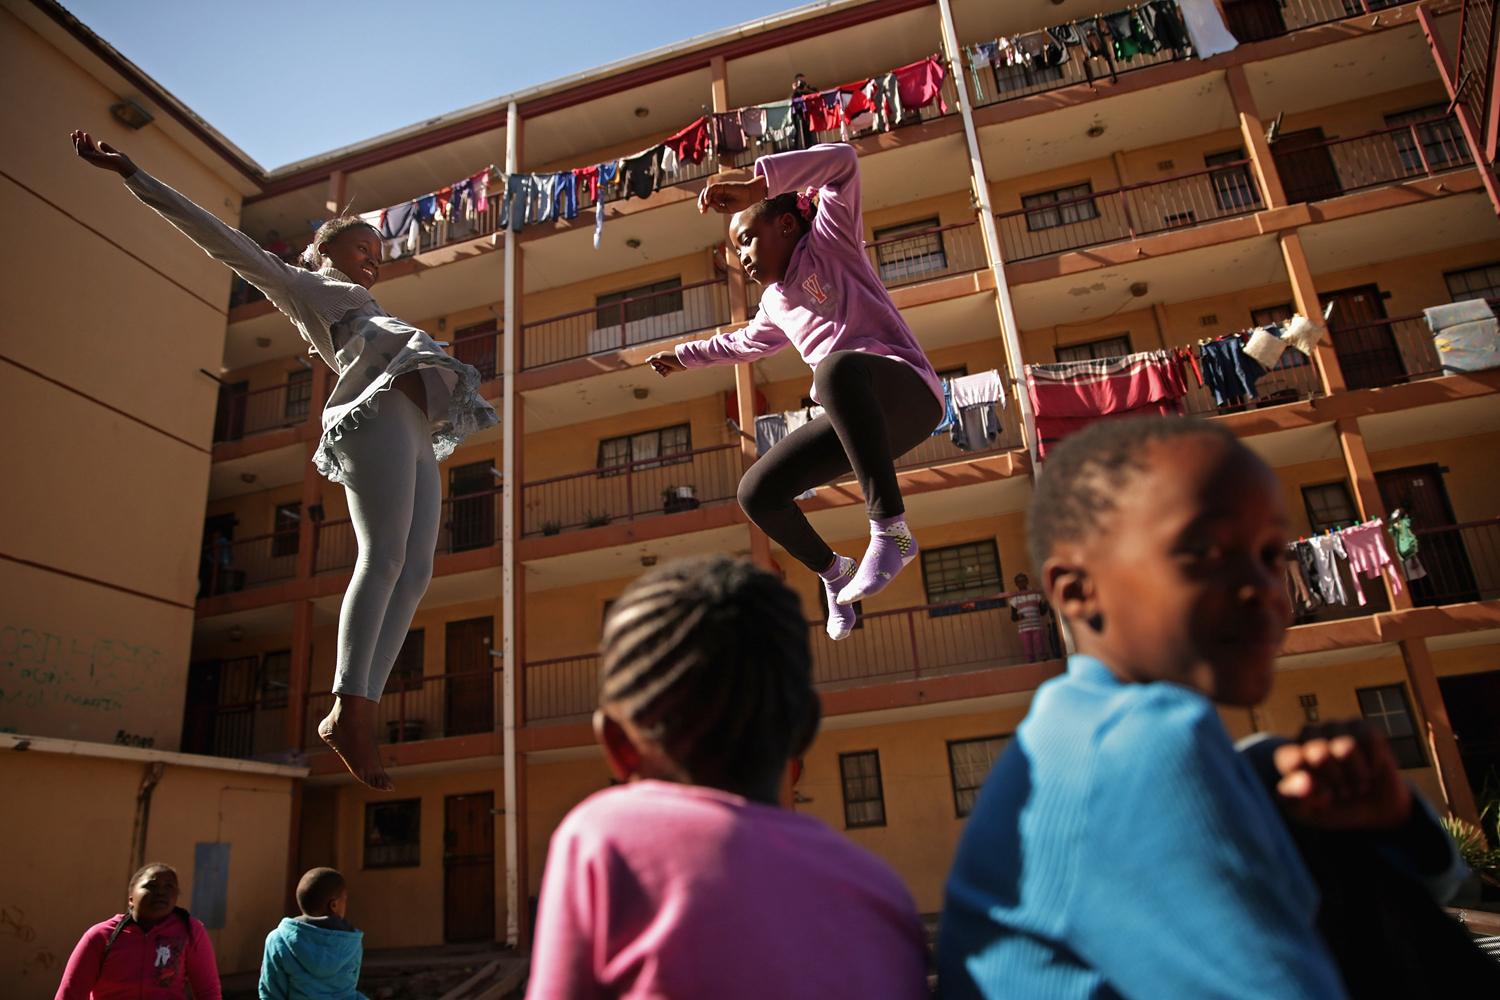 June 26, 2013. Phaphama Nxumalo (L), 12, and Natasha Mbatha, 9, members of the Alexandra Trampoline Club, practices in an alleyway between apartment blocks in Johannesburg, South Africa.